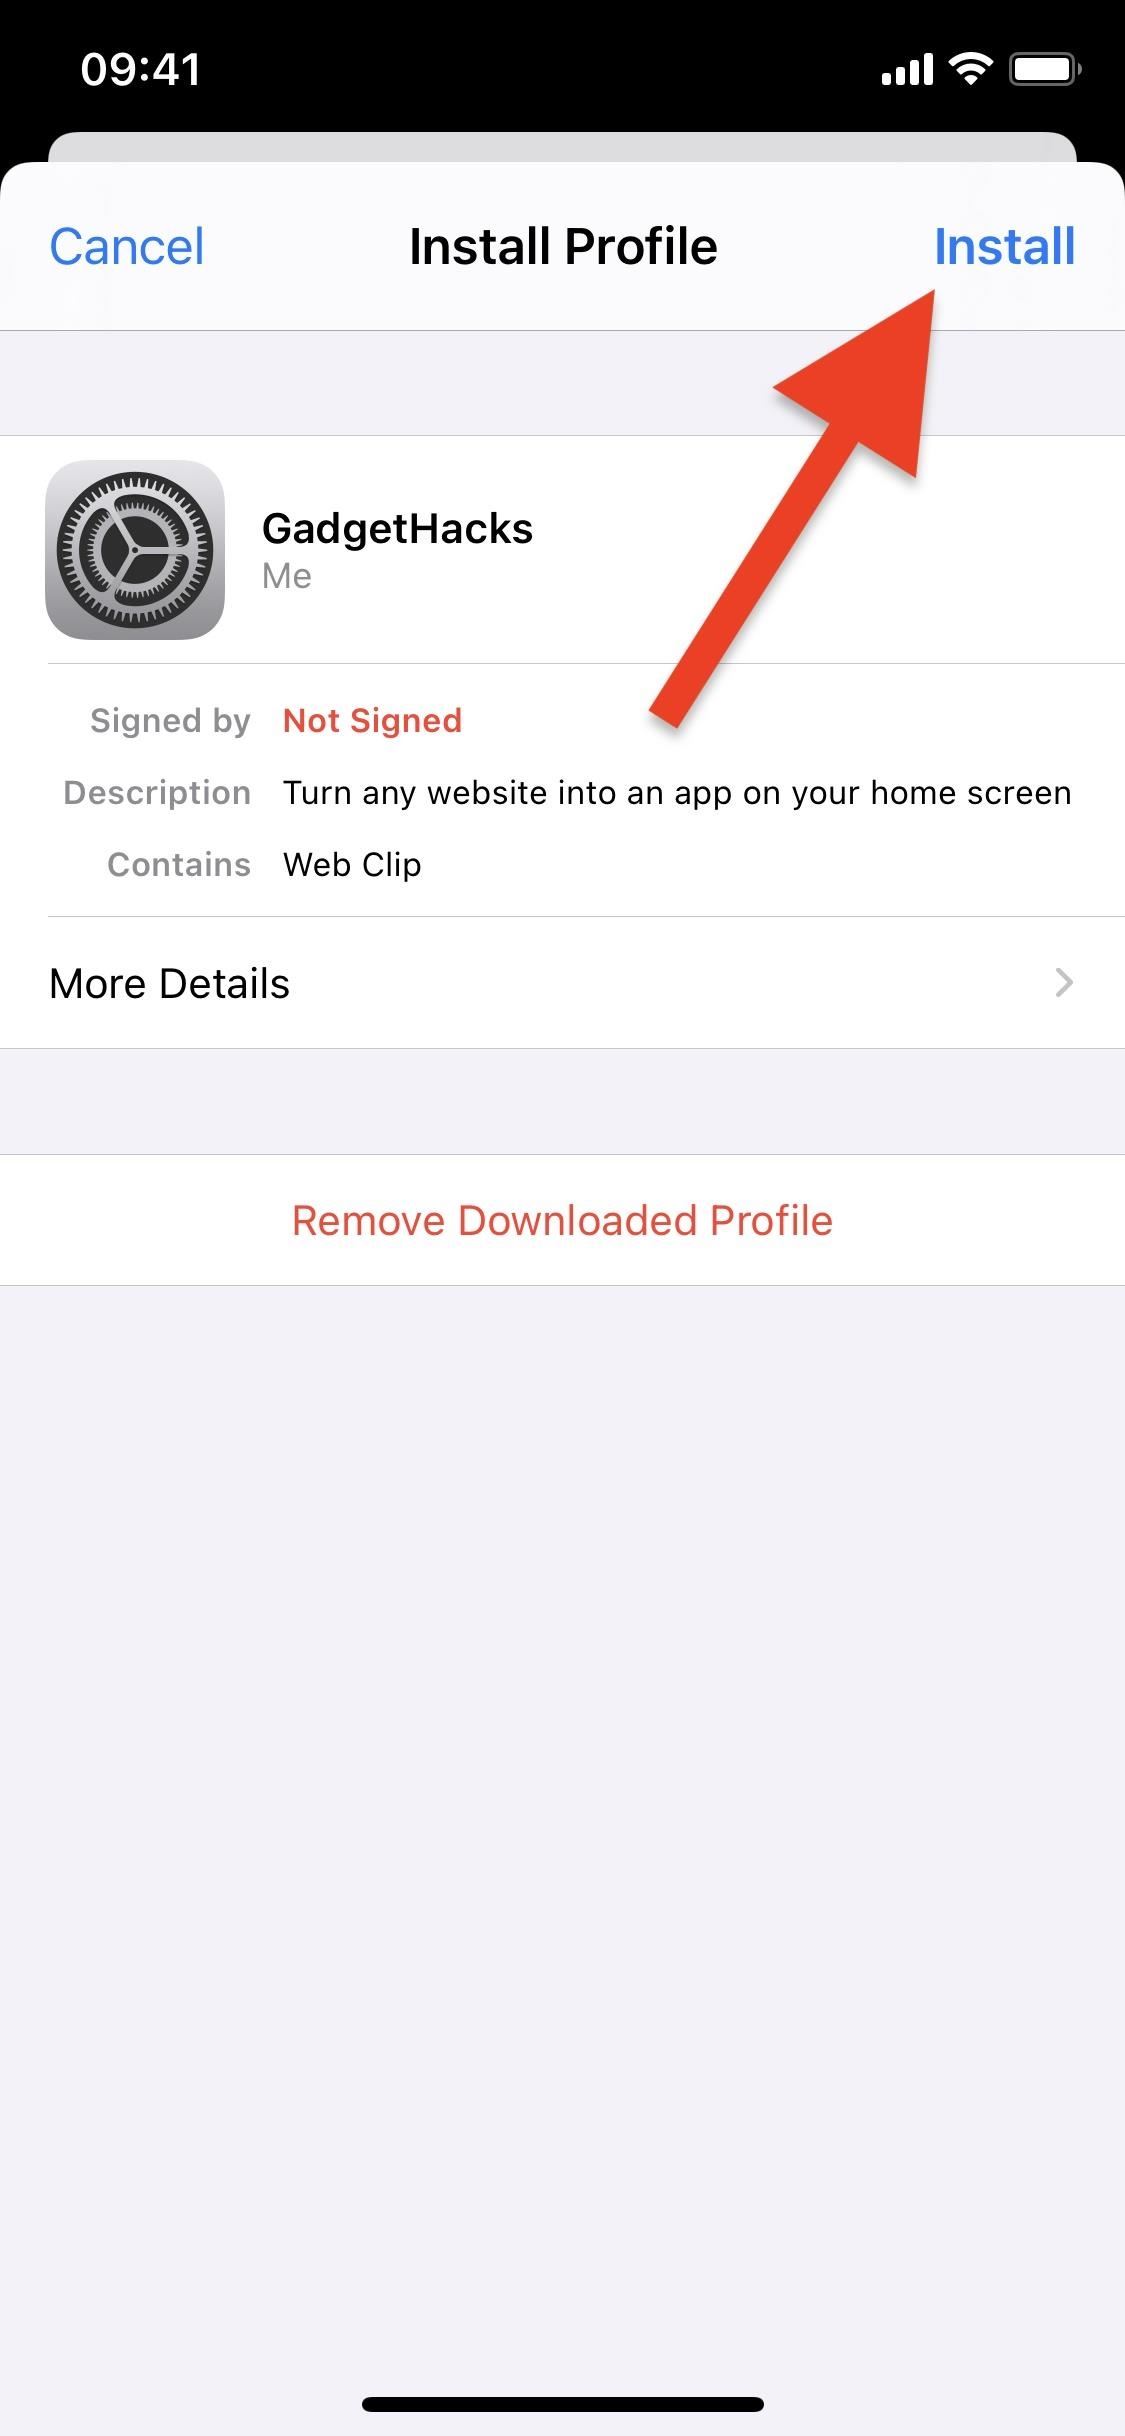 Turn Any Website into a Full-Screen App on Your iPhone